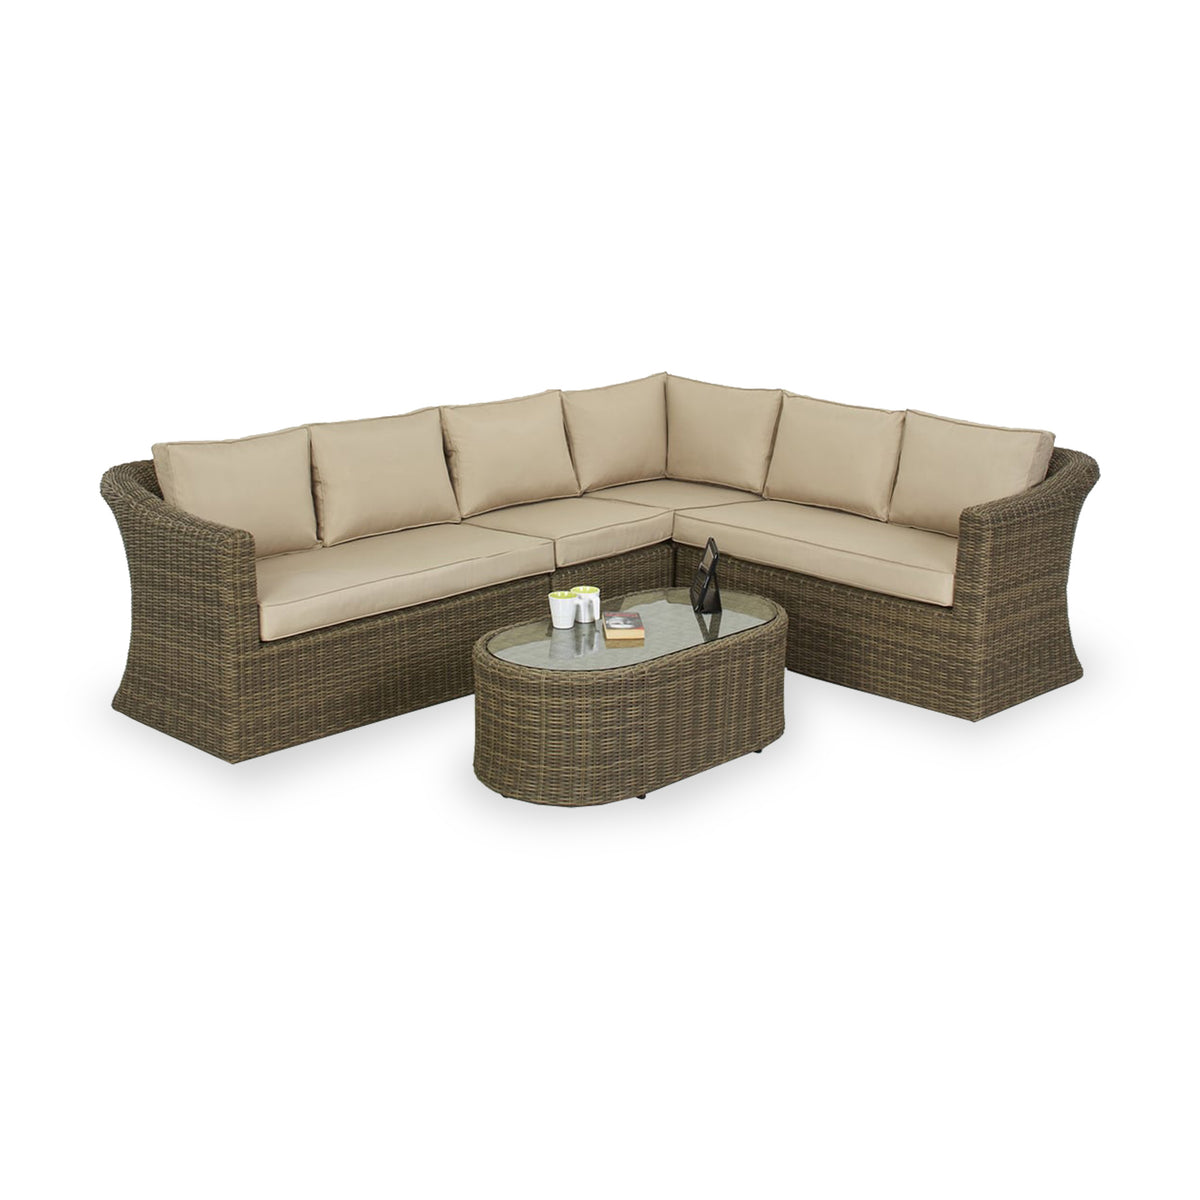 Maze Winchester Large Rattan Corner Sofa Group from Roseland Furniture